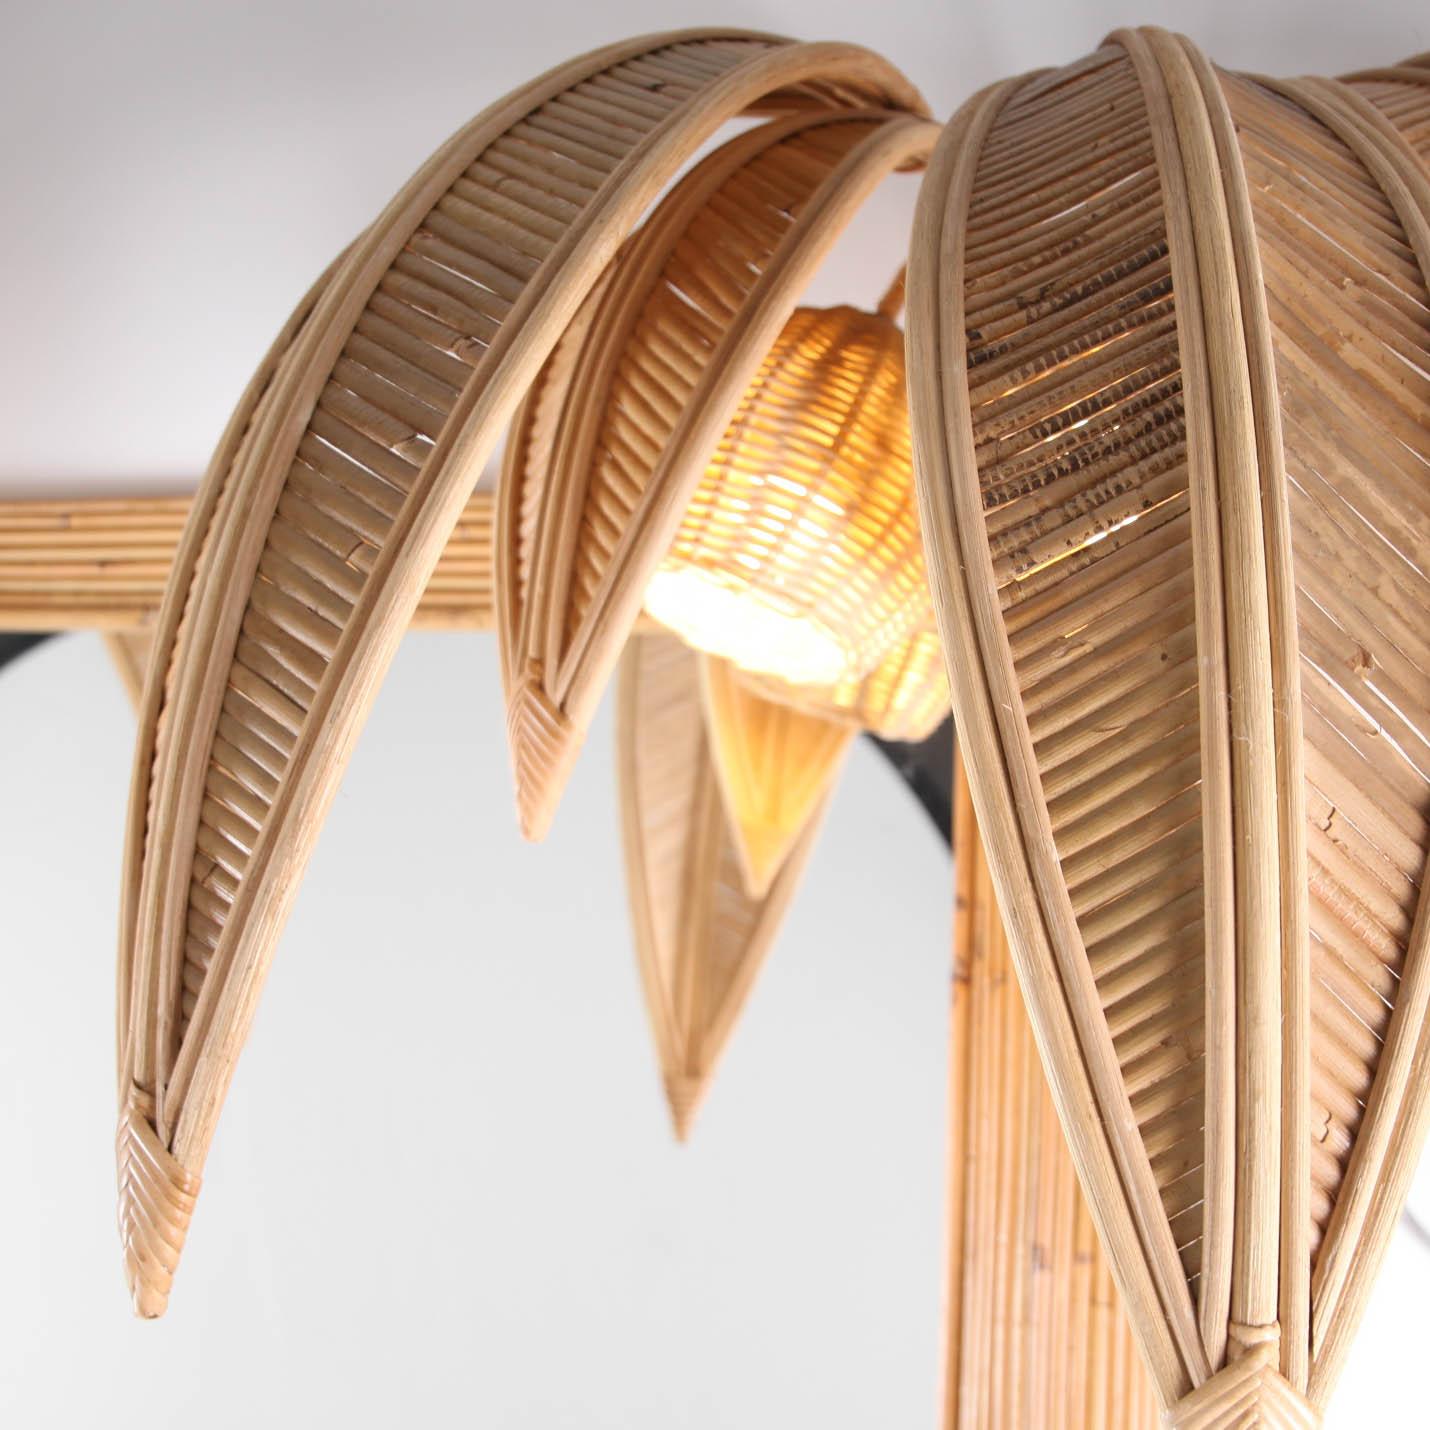 Rare rattan coconut tree / palm tree full-length mirror with 4 lights in the coconuts.
In the style of Mario Lopez Torres, Vivai del Sud, Maison Jansen.